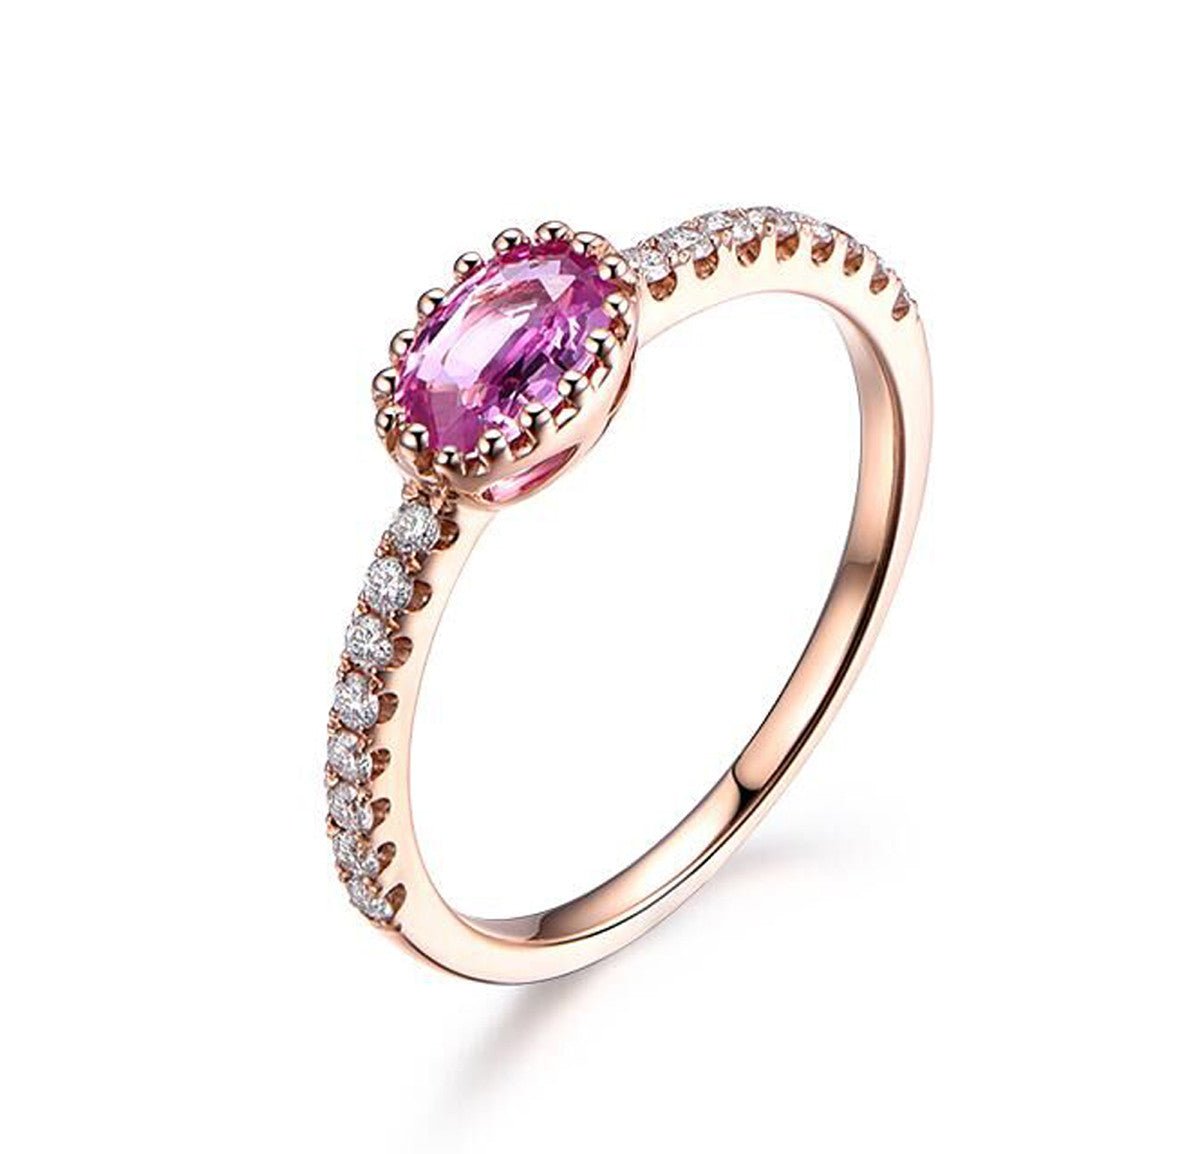 East-West Oval Pink Sapphire Diamond Engagement Ring - Lord of Gem Rings